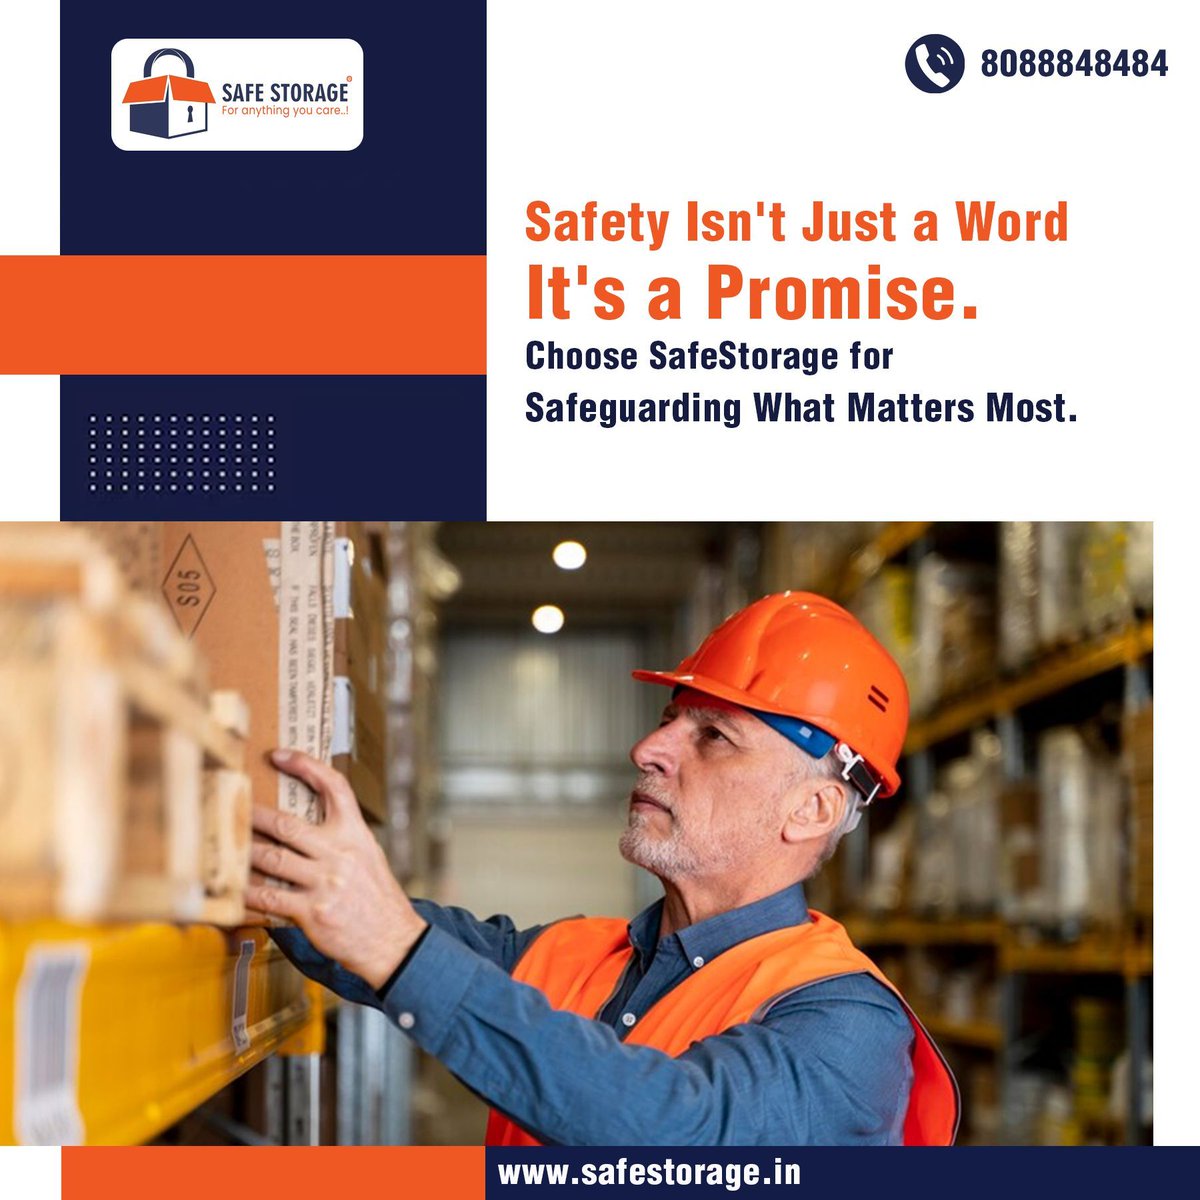 Safeguard what matters most with SafeStorage - where safety isn't just a word, it's a promise kept. 

For more details:
Visit our website -buff.ly/2pK6eaM
Call now: 8088848484
#SafeStorage #DeclutterYourLife #explore #SecureStorage #PeaceOfMind